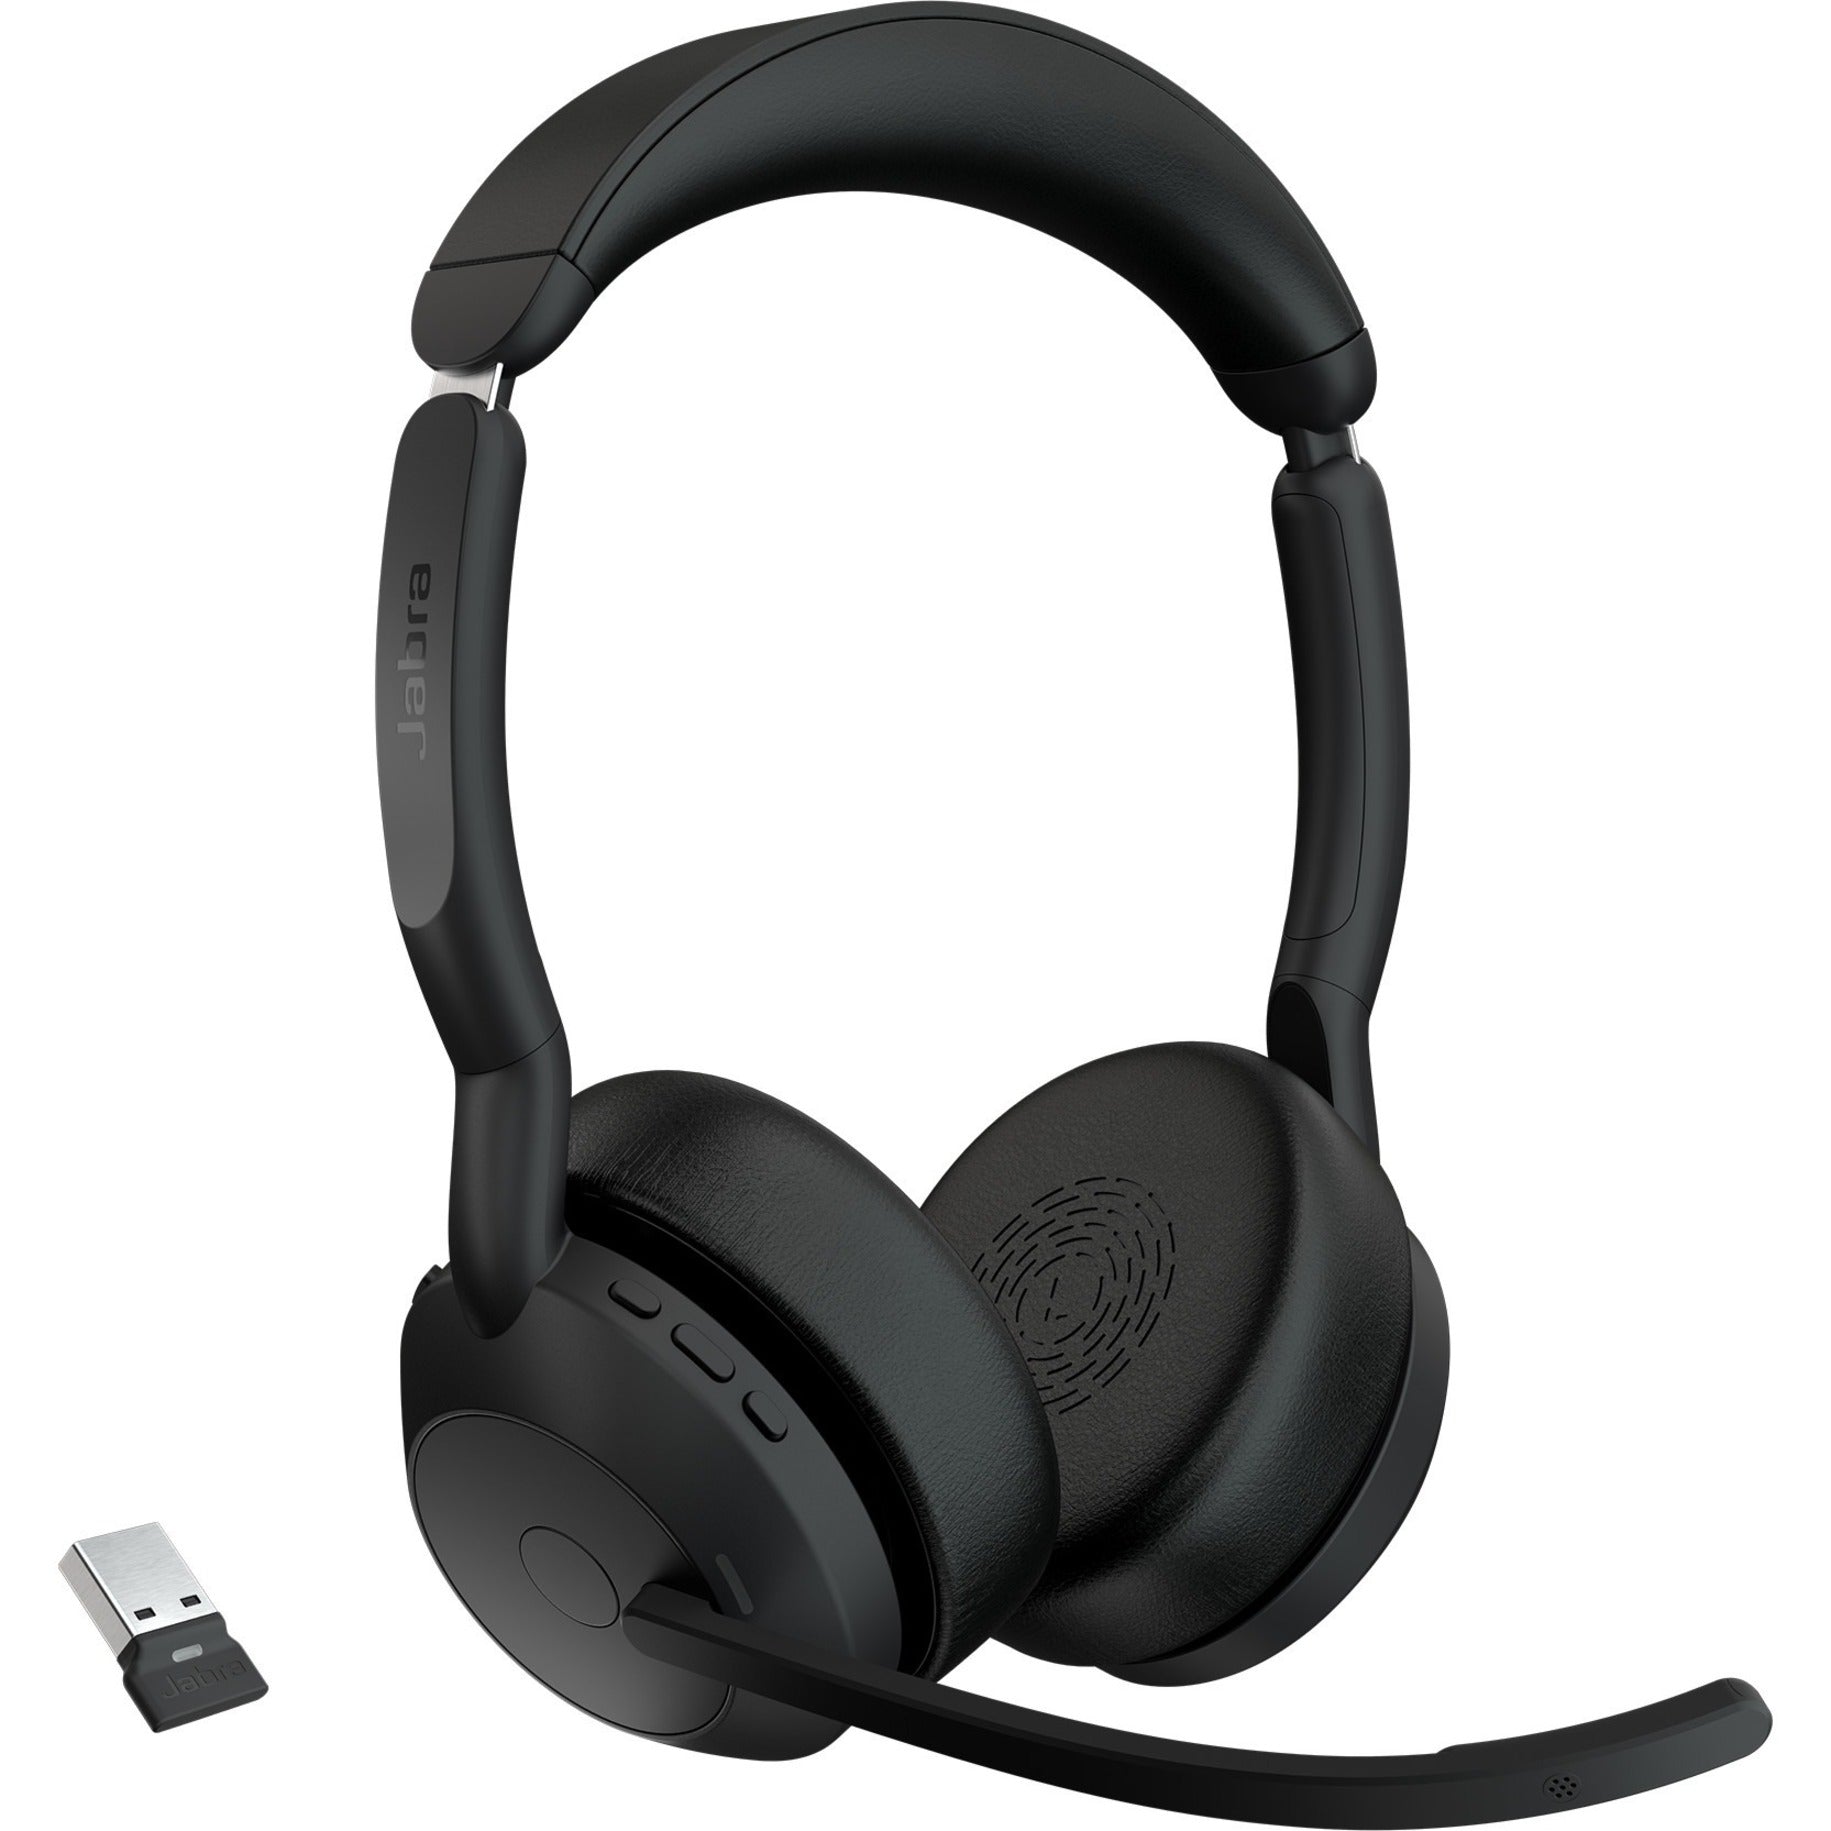 Jabra 25599-989-899-01 Evolve2 55 Headset, Wireless Bluetooth Stereo Headphones with Noise Cancelling, 2 Year Warranty